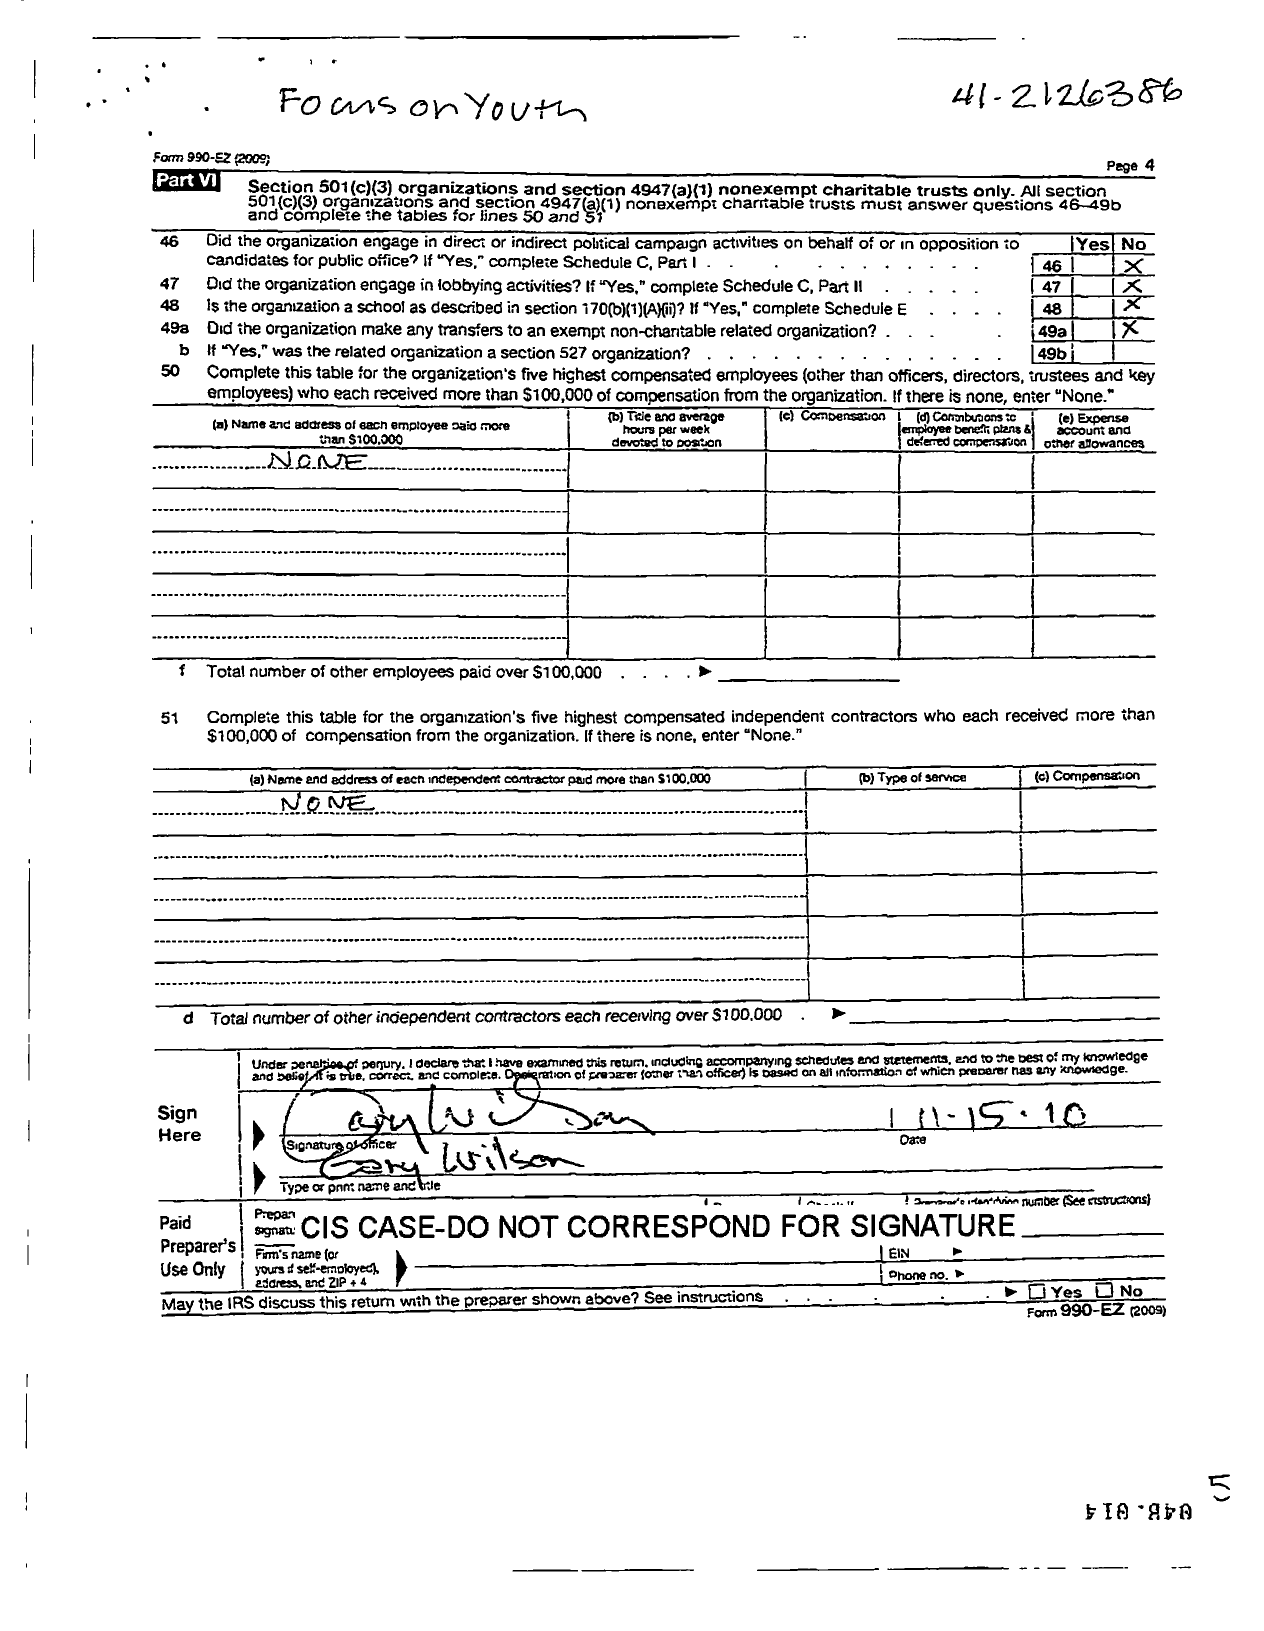 Image of first page of 2009 Form 990ER for Focus on Youth